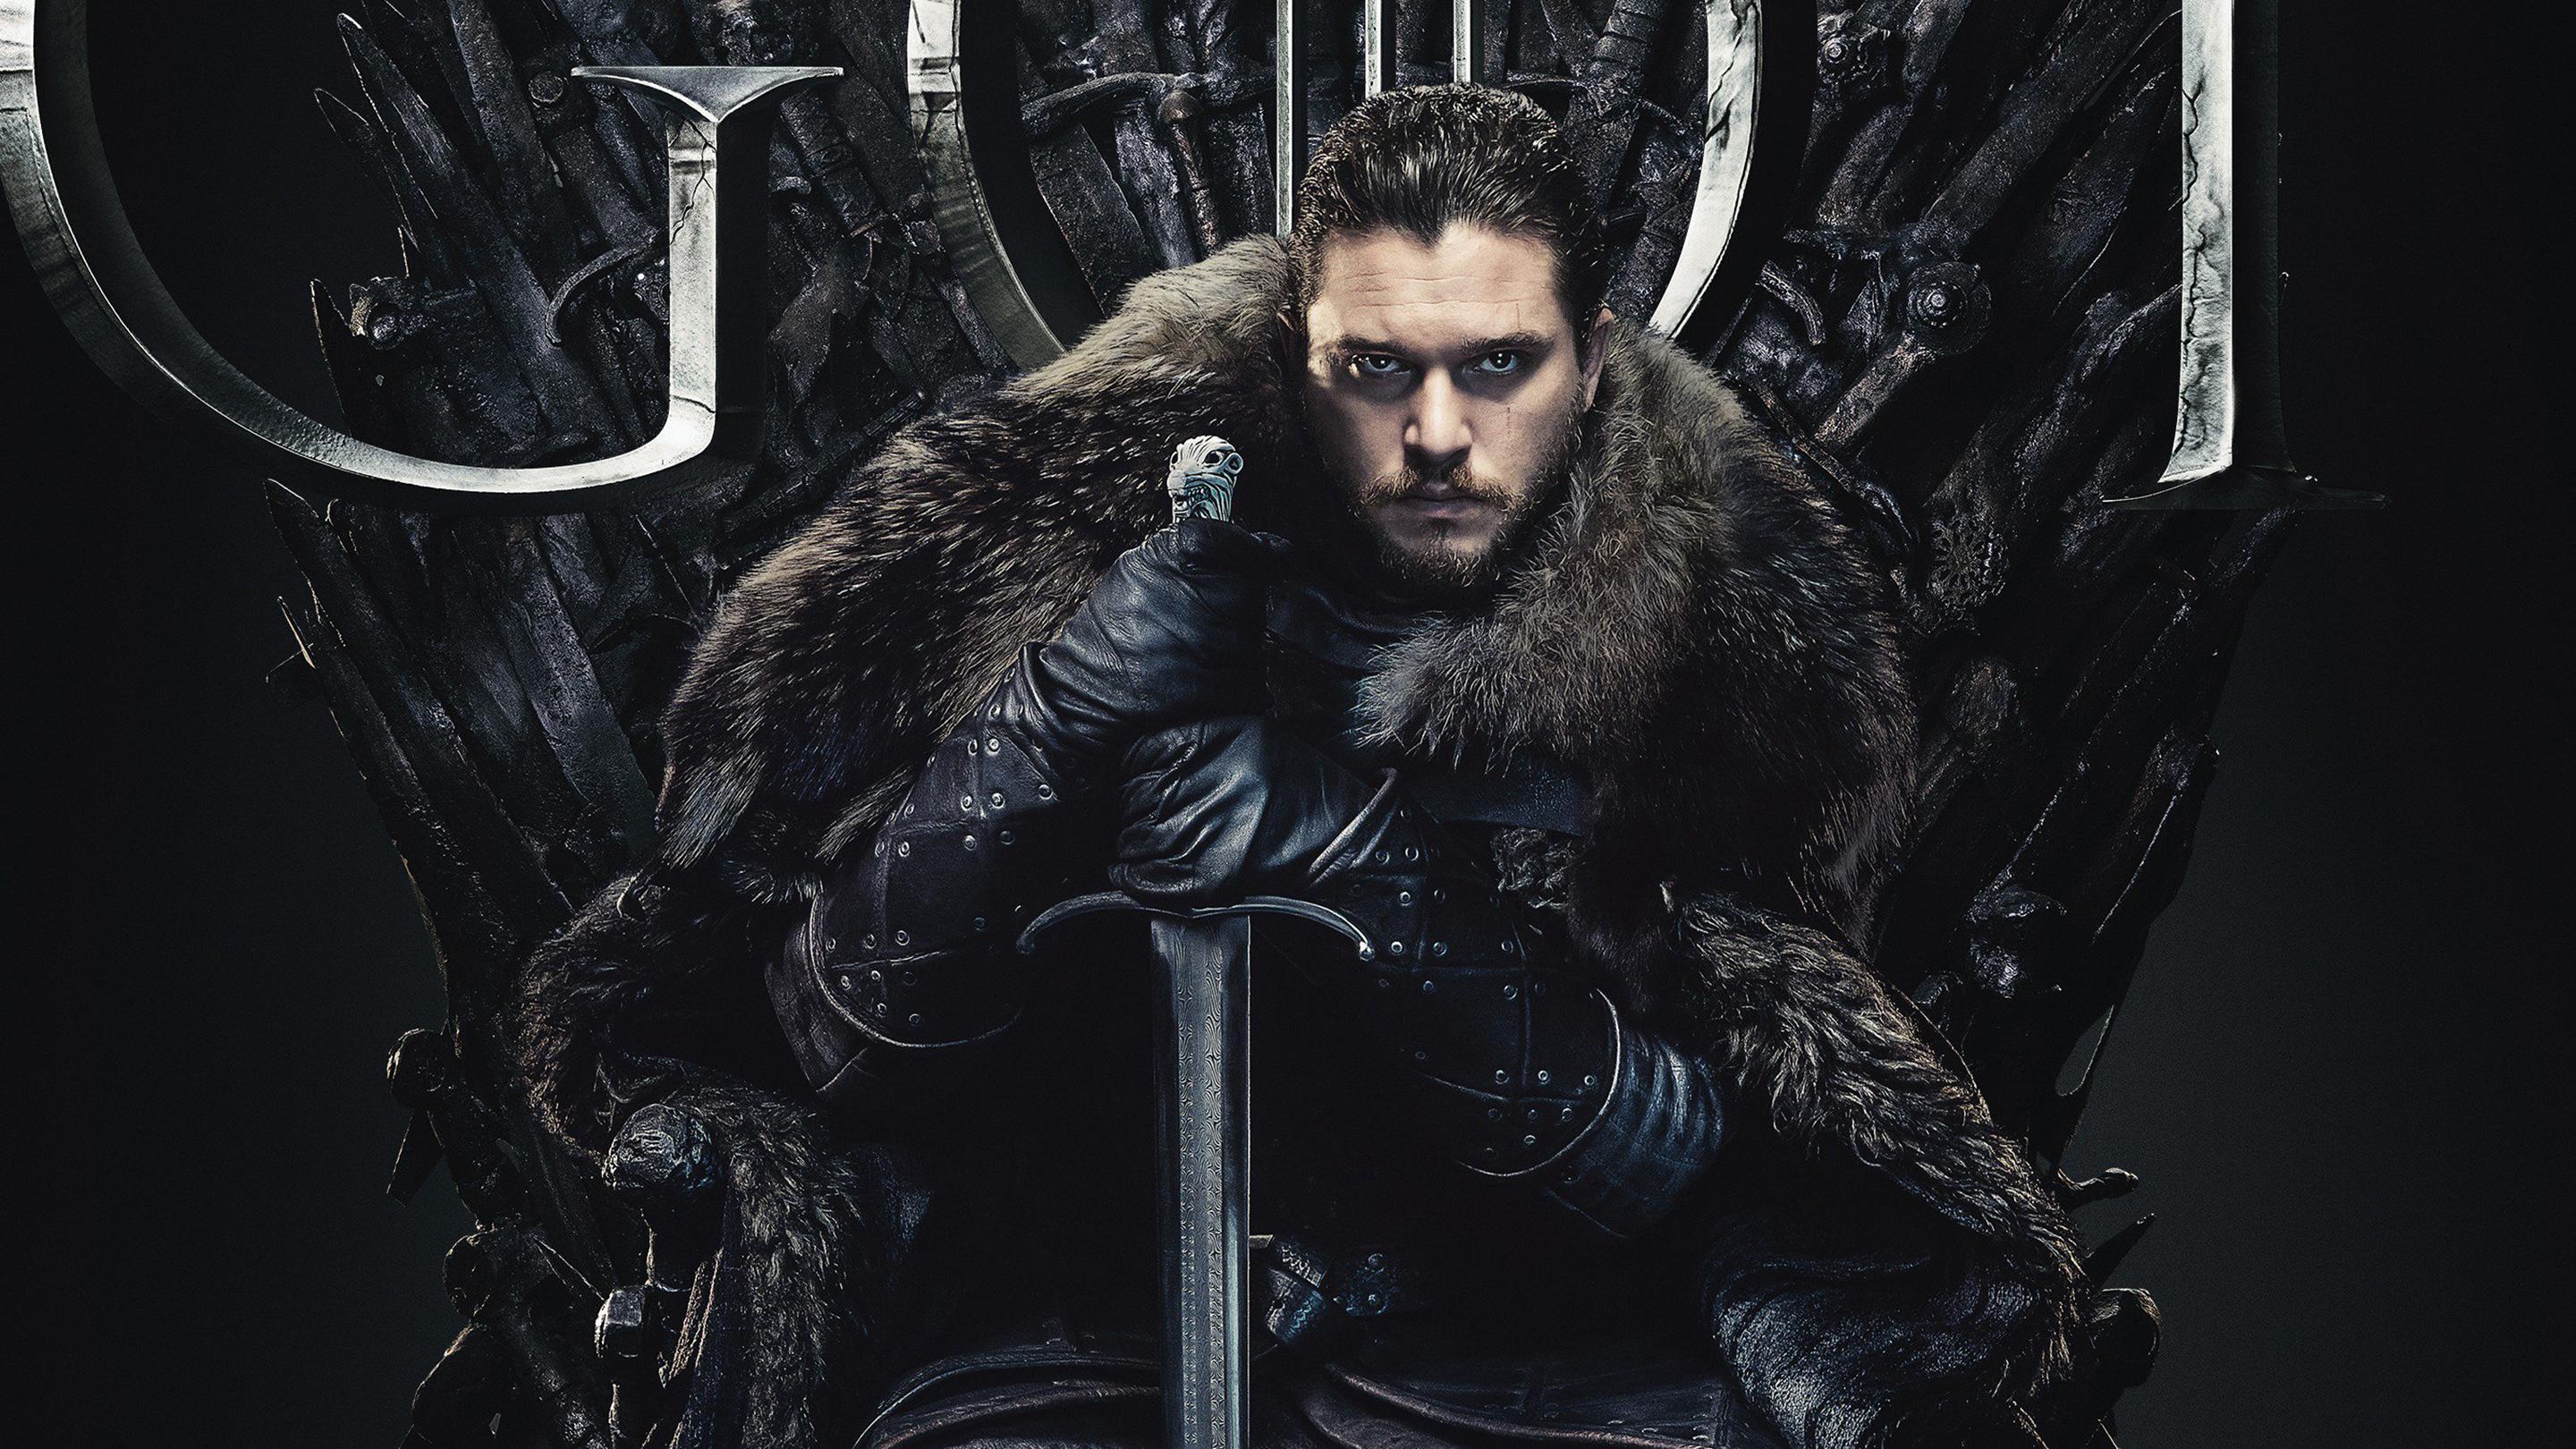 Game Of Thrones Season 8 Wallpapers - Top Free Game Of Thrones ...